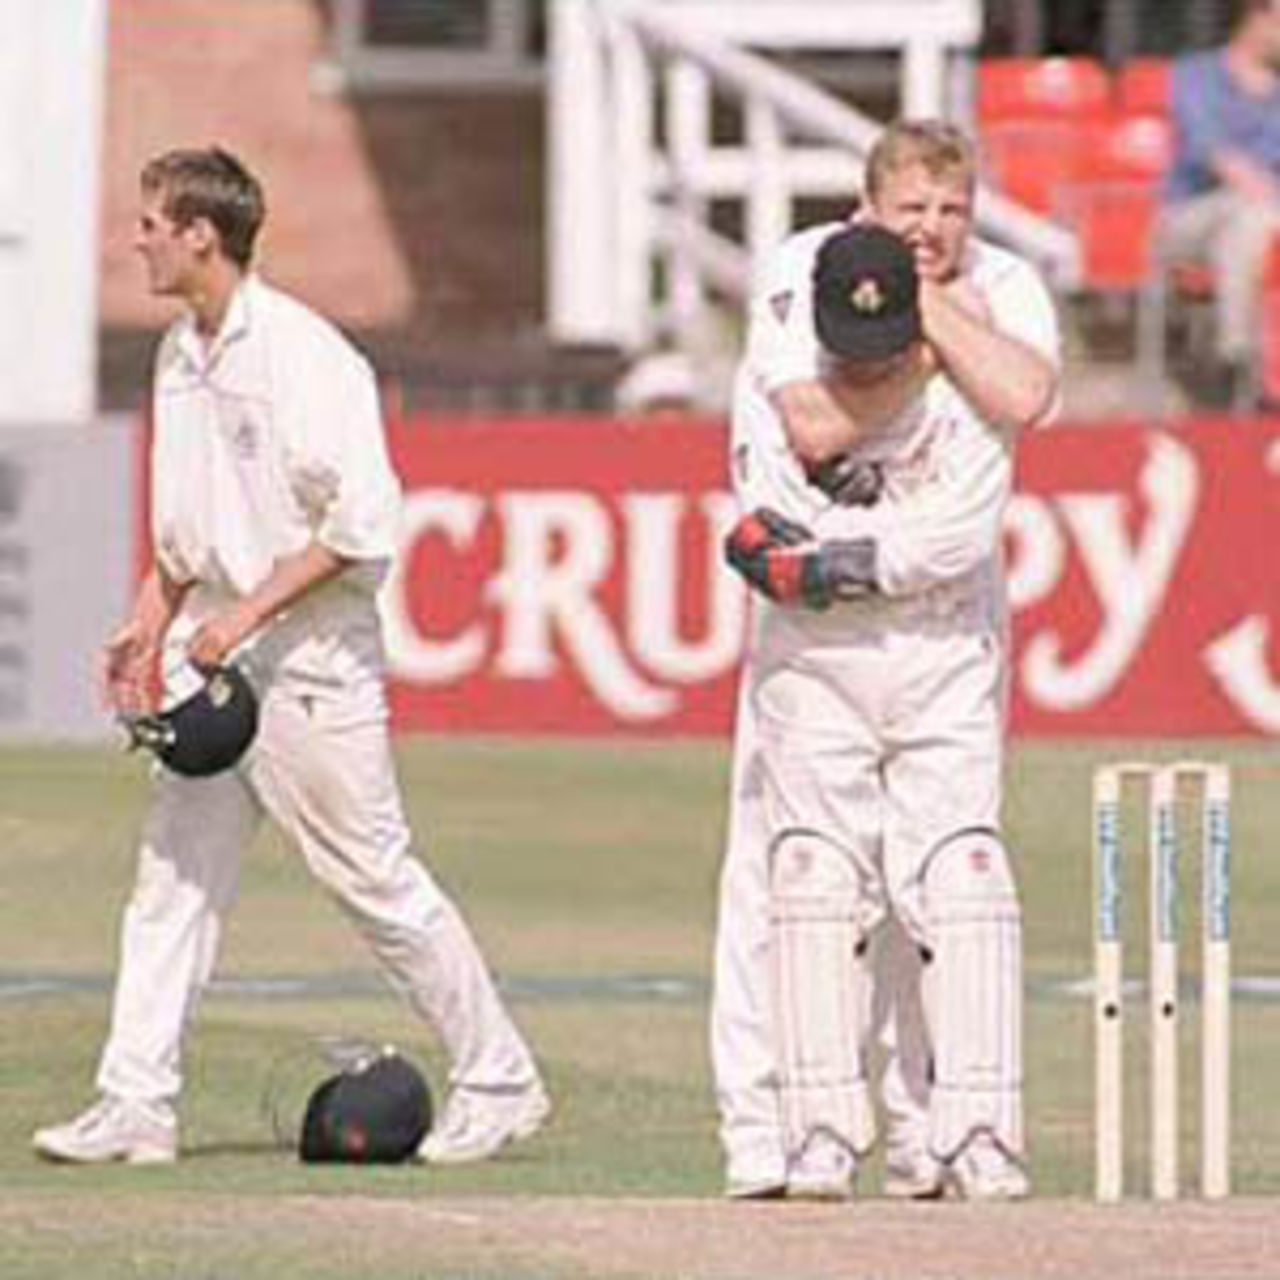 Andrew Flintoff gets to grips with Warren Hegg, PPP healthcare County Championship Division One, 2000, Leicestershire v Lancashire, Grace Road, Leicester, 22-25 August 2000(Day 4).